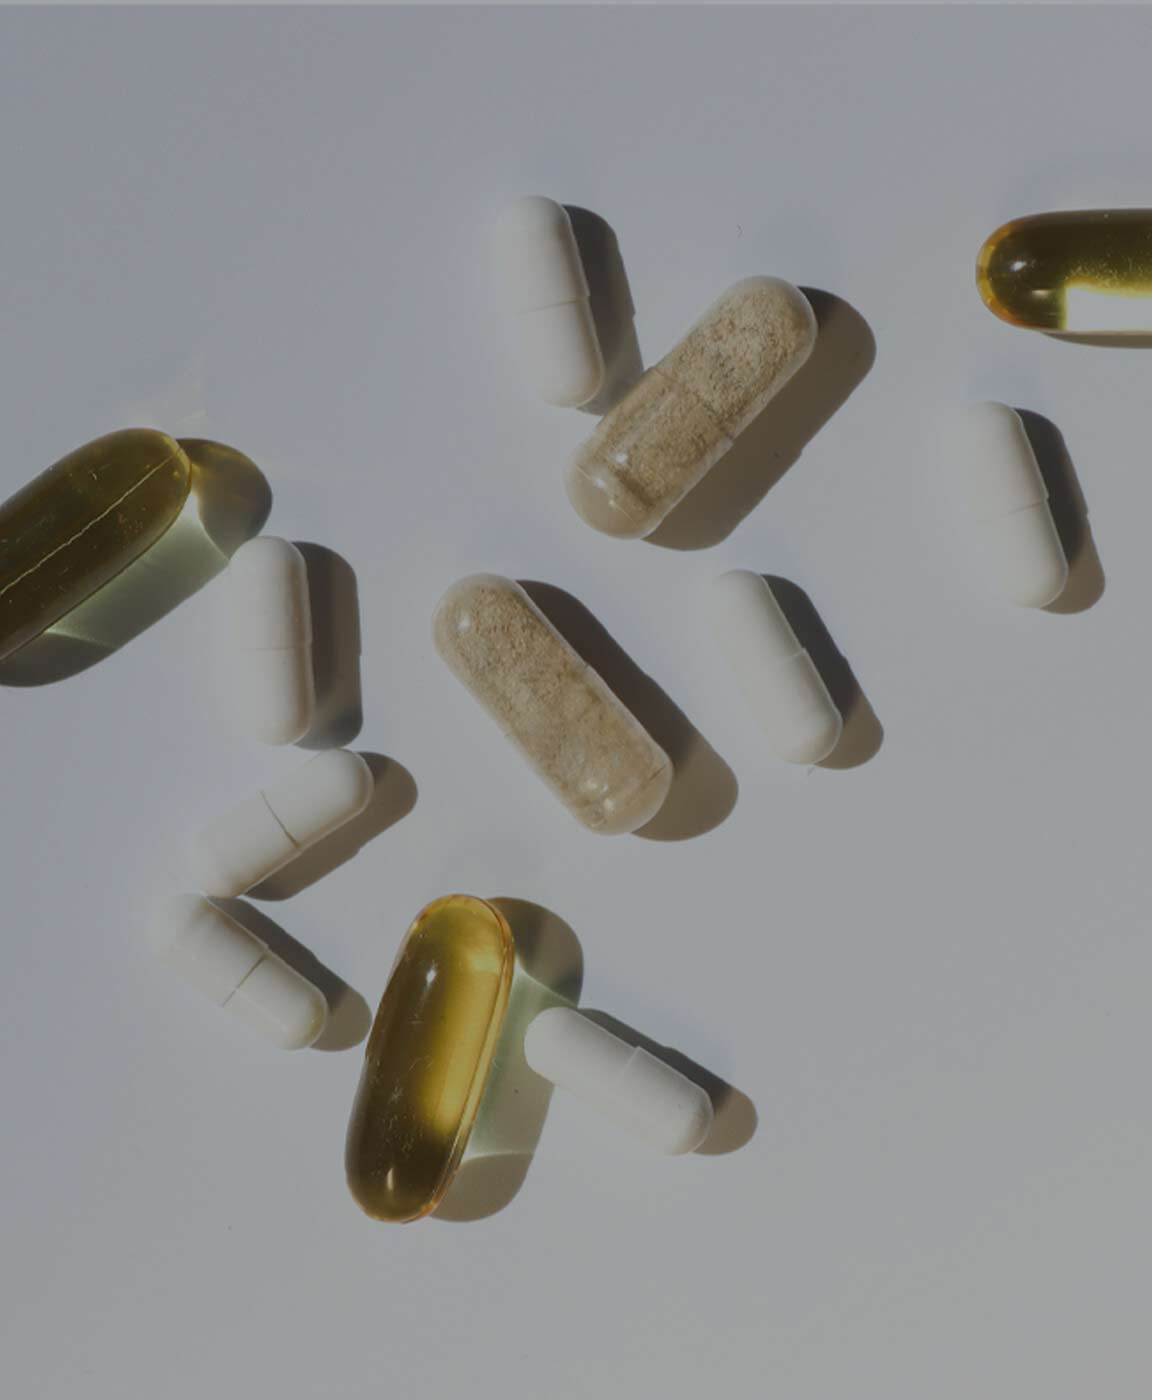 Vitamin Dosage- Here’s how much of each vitamin you should be taking